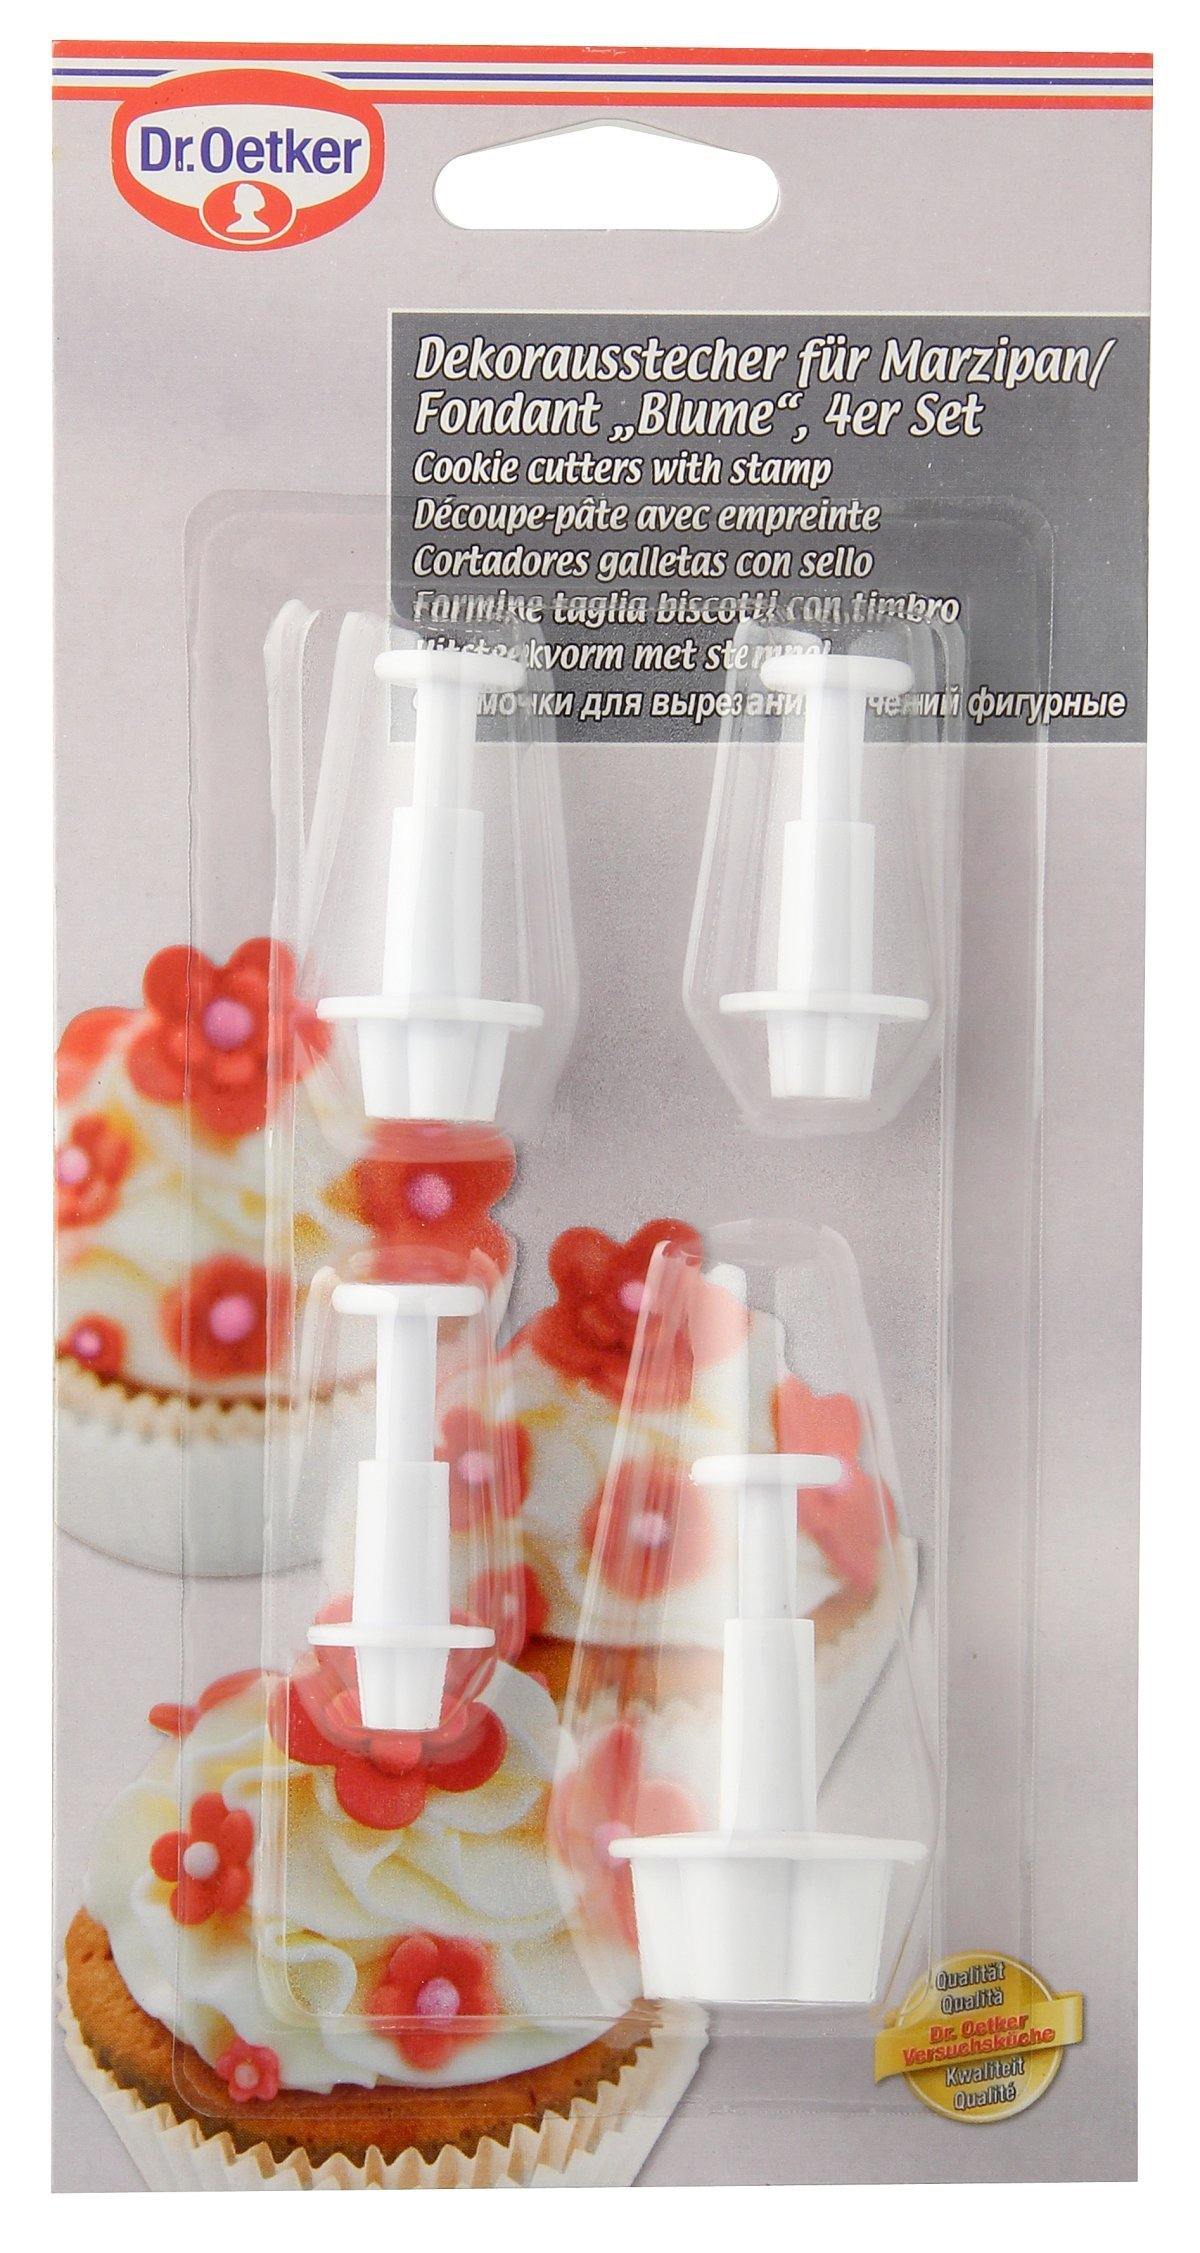 Dr. Oetker Decoration Cutter For Marzipan/Fondant Flowers Of Plastic, 4-Pcs, Baking Form, Decoration Template - Whole and All